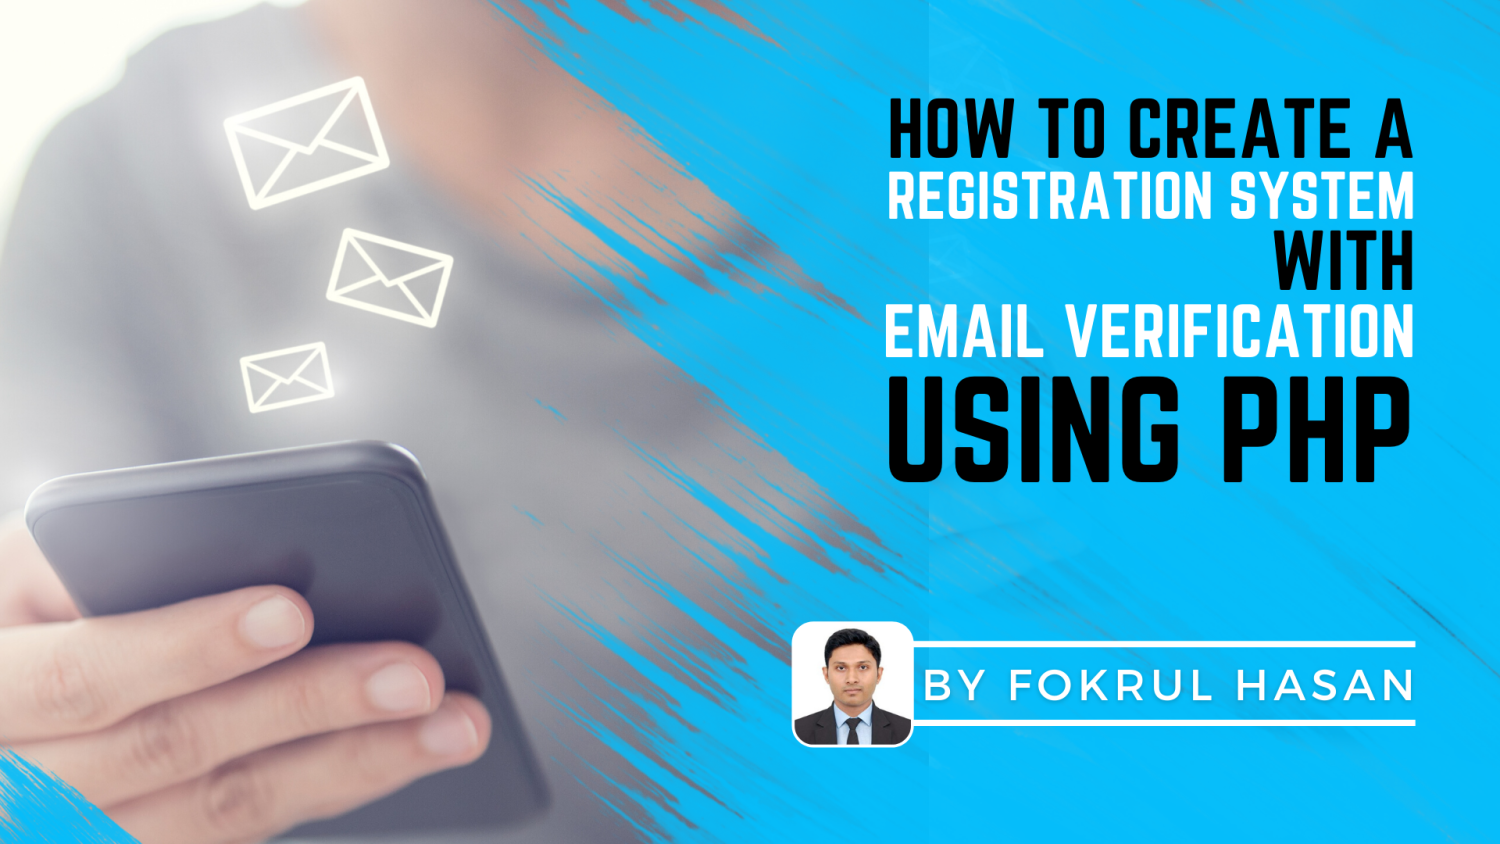 How to create a registration system with email verification using php